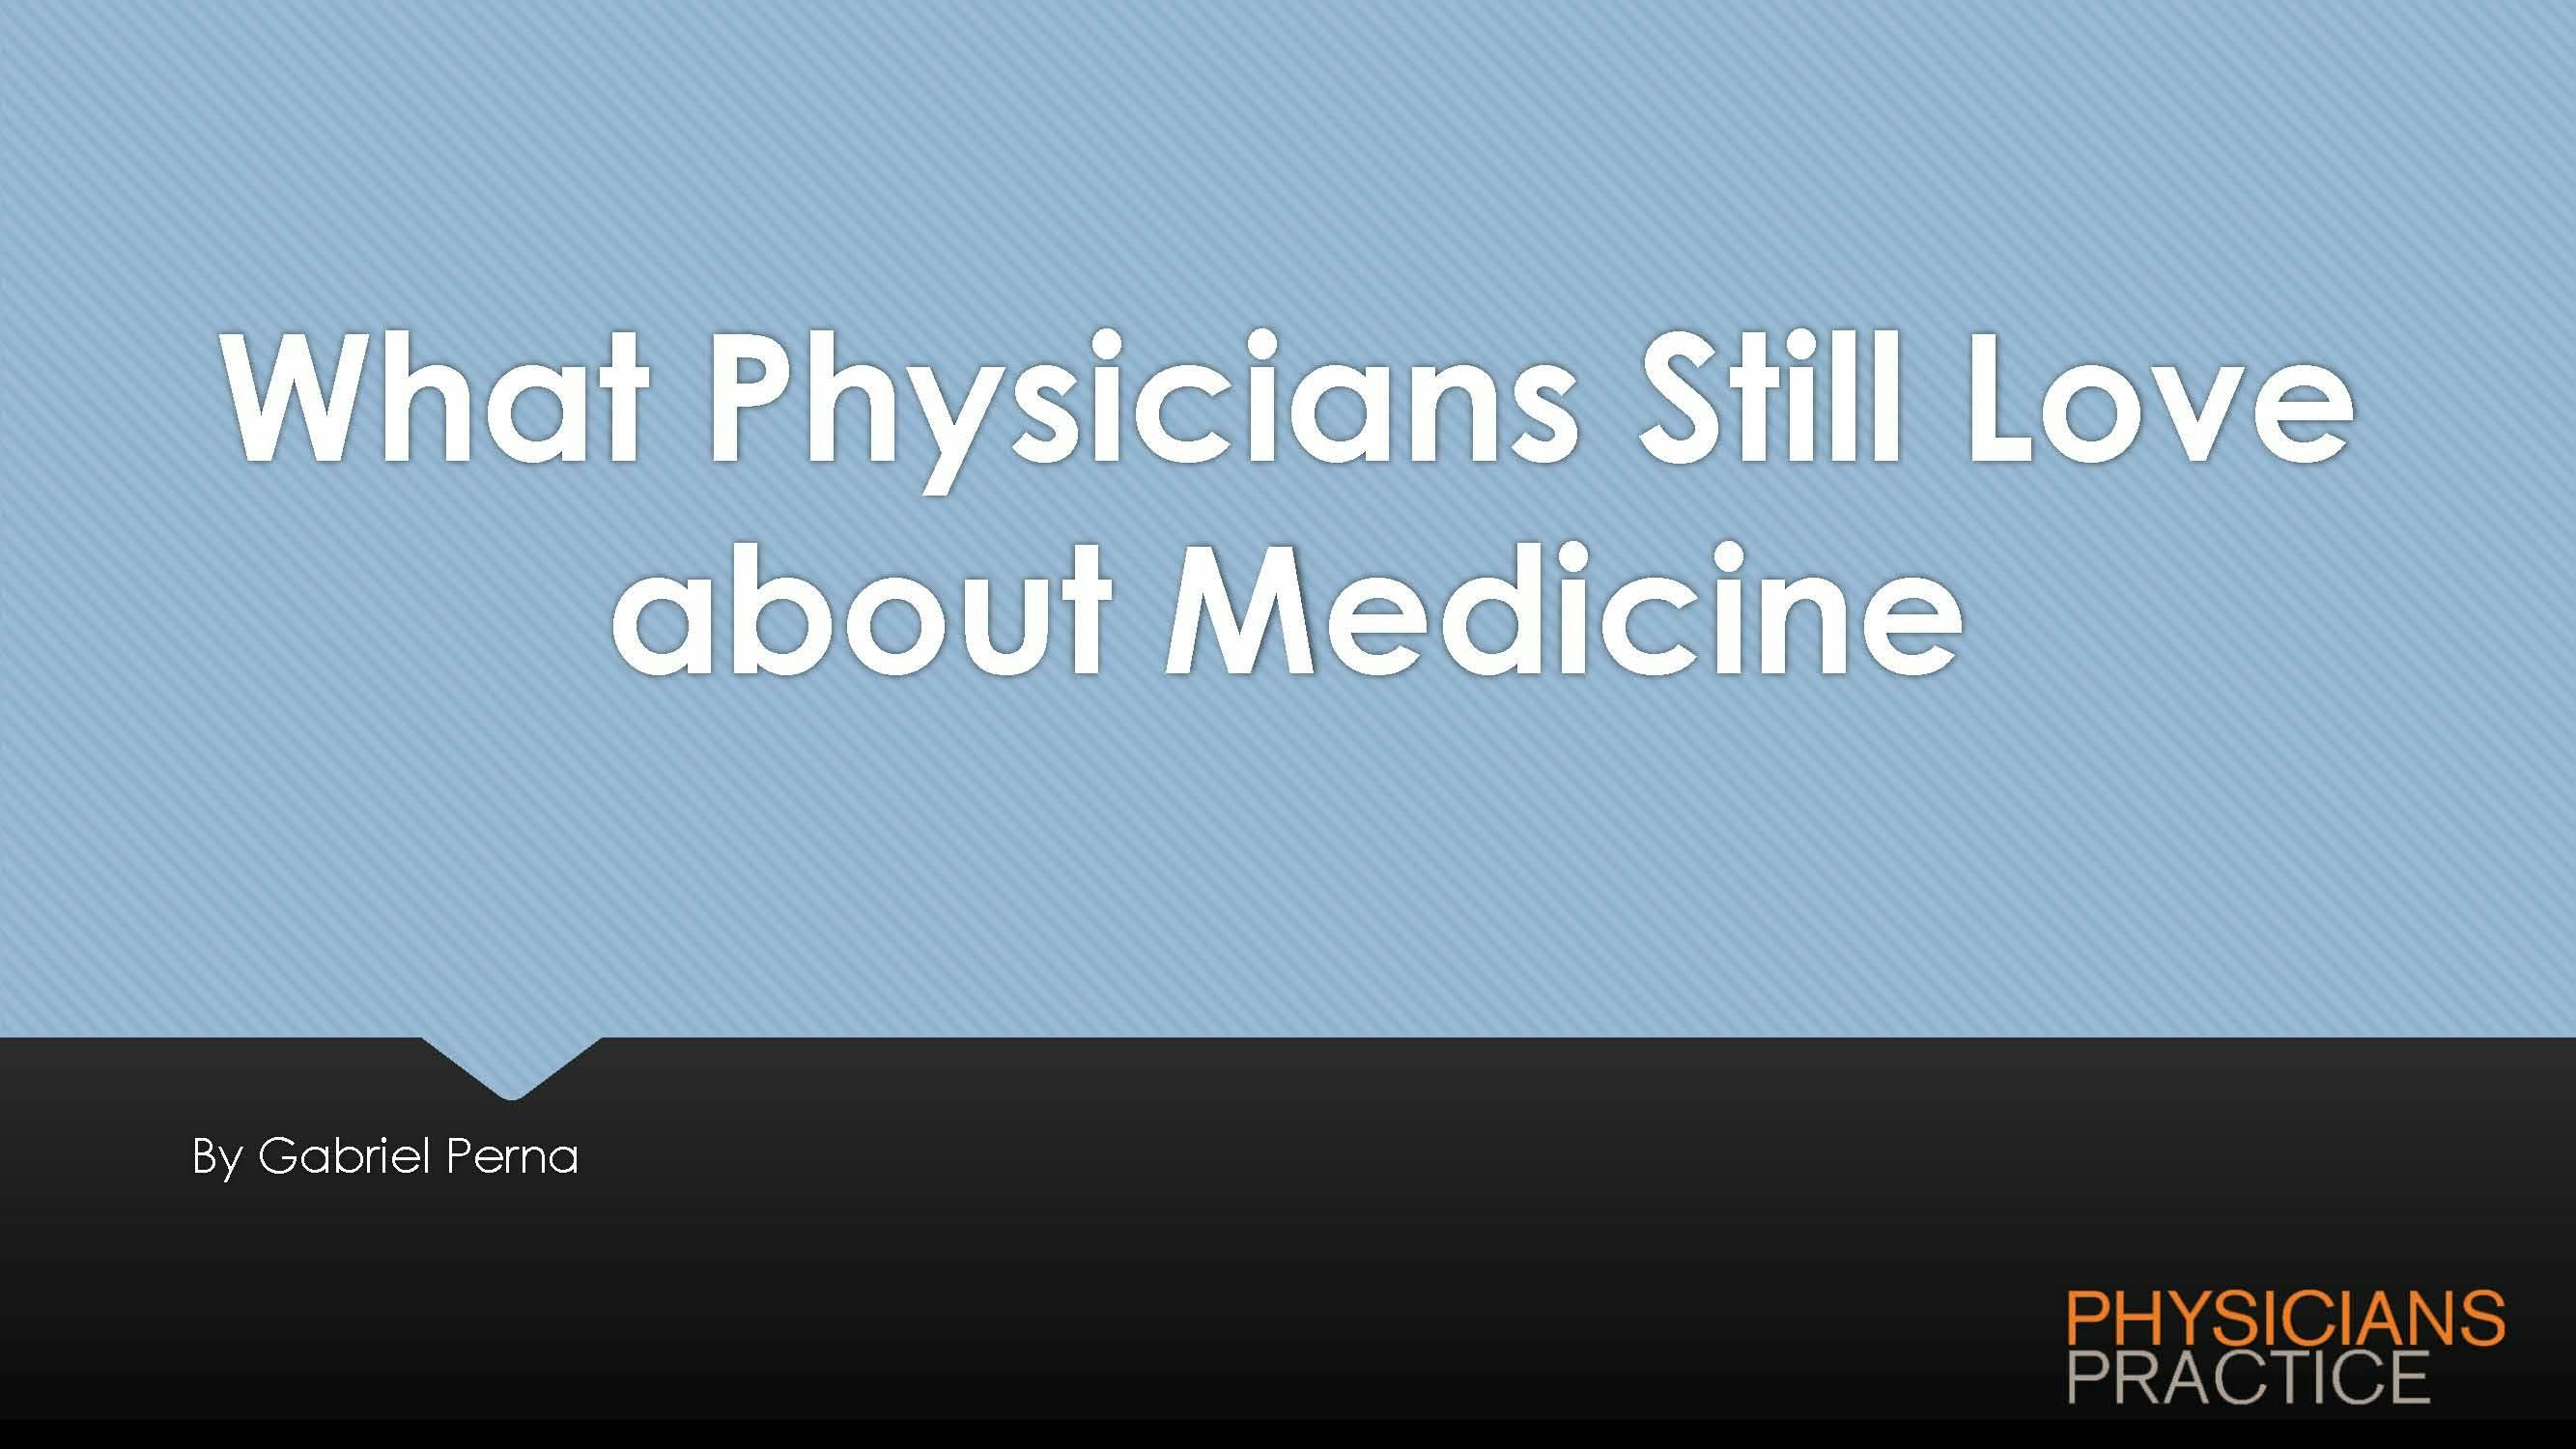 What Physicians Still Love about Medicine